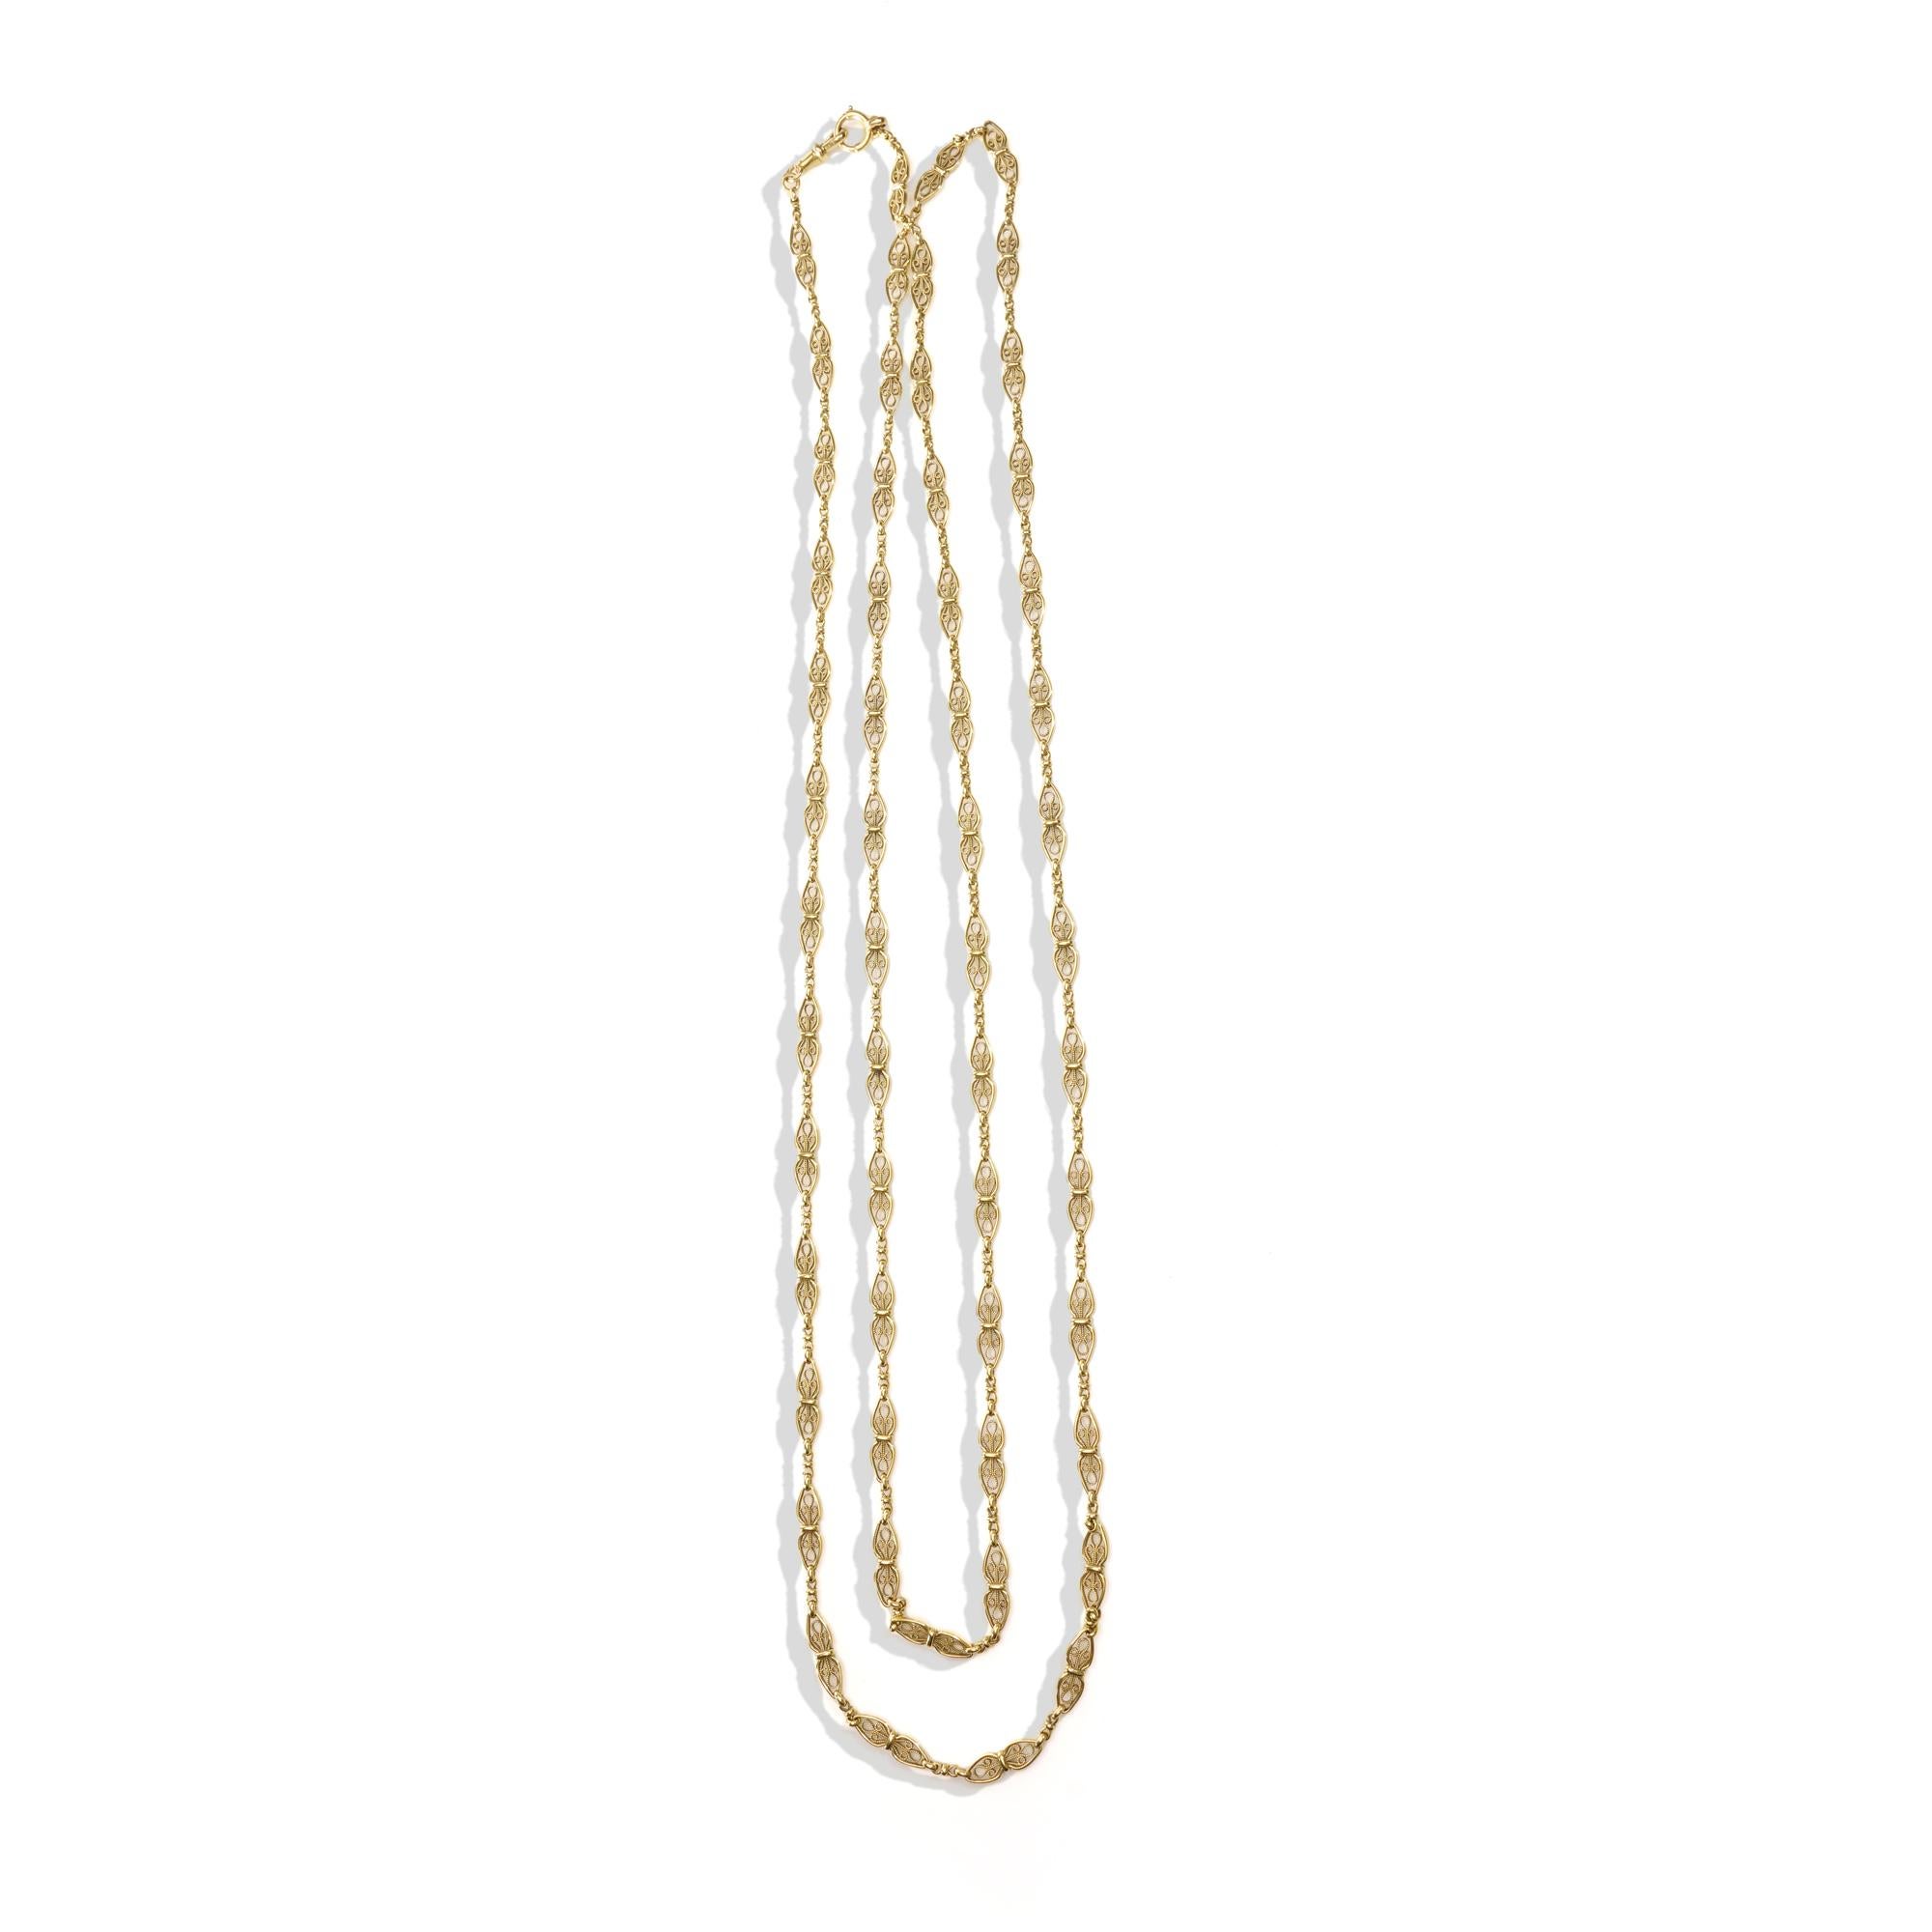 Indulge in the timeless elegance of this exquisite Antique French 18kt Yellow Gold Long Fancy Link Chain Necklace. Crafted in the 19th century, circa 1838-1847, in France, this stunning piece showcases the unparalleled craftsmanship of the